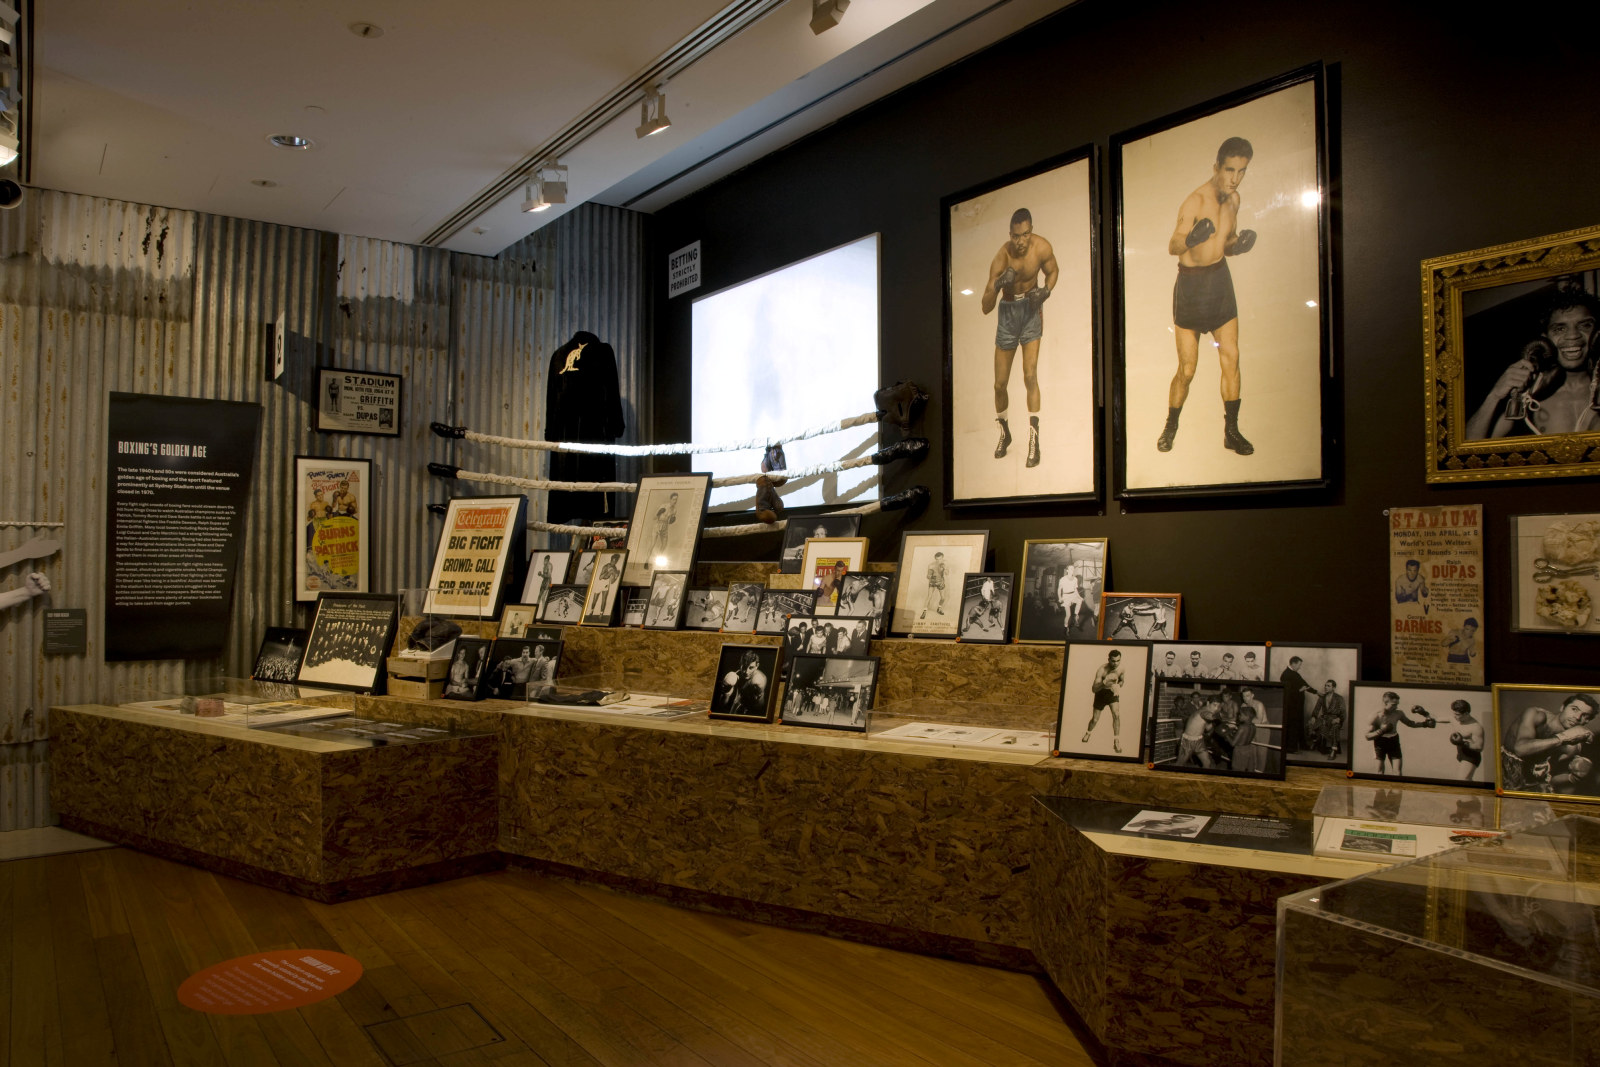 Exhibition interior showing framed photographs of boxers, posters and a screen on the wall.